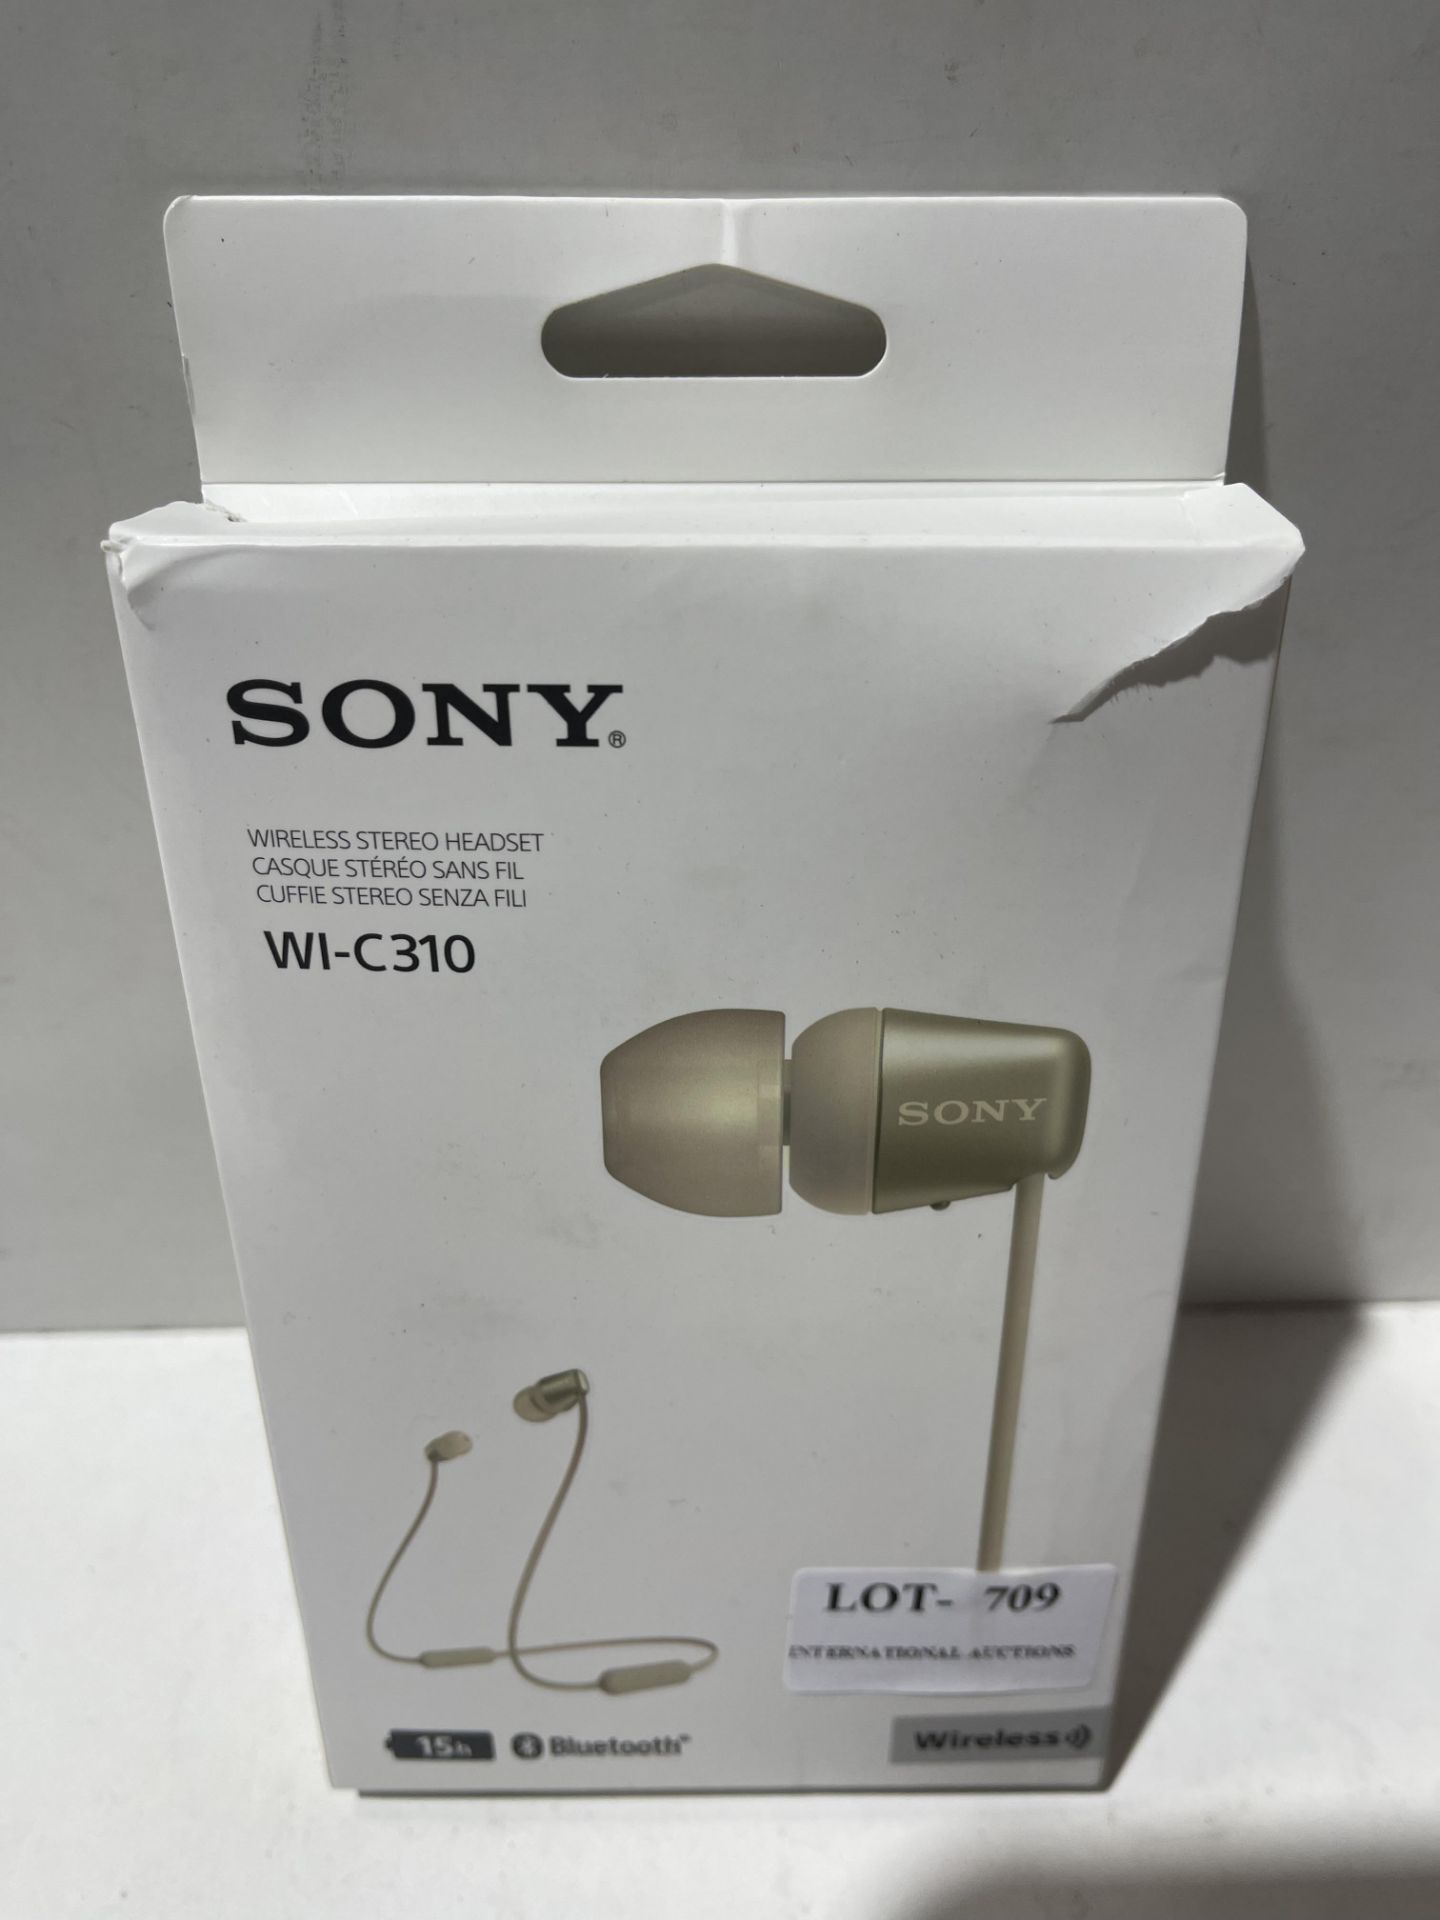 Sony WI-C310 Bluetooth Wireless In-Ear Headphones with Mic, up to 15h battery life, Gold Â£26.